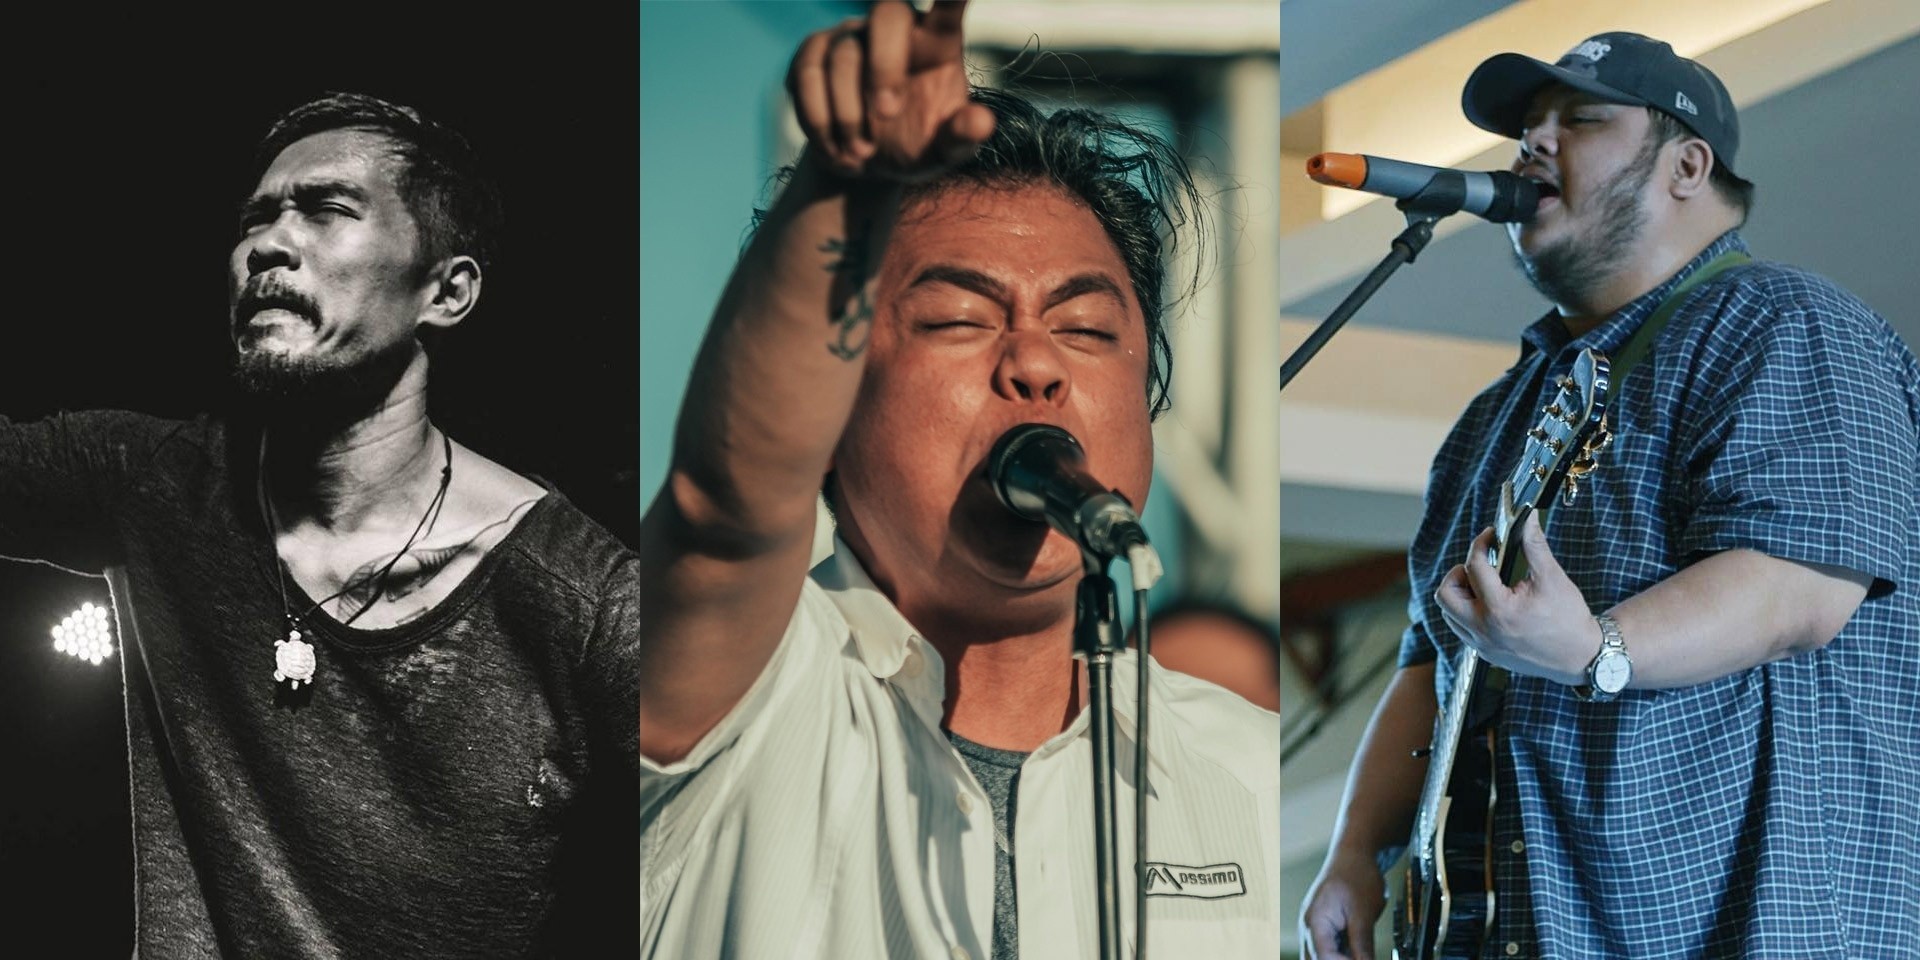 Kjwan, Kevin Roy, Mayonnaise to perform at the OPM Music Festival in Dubai